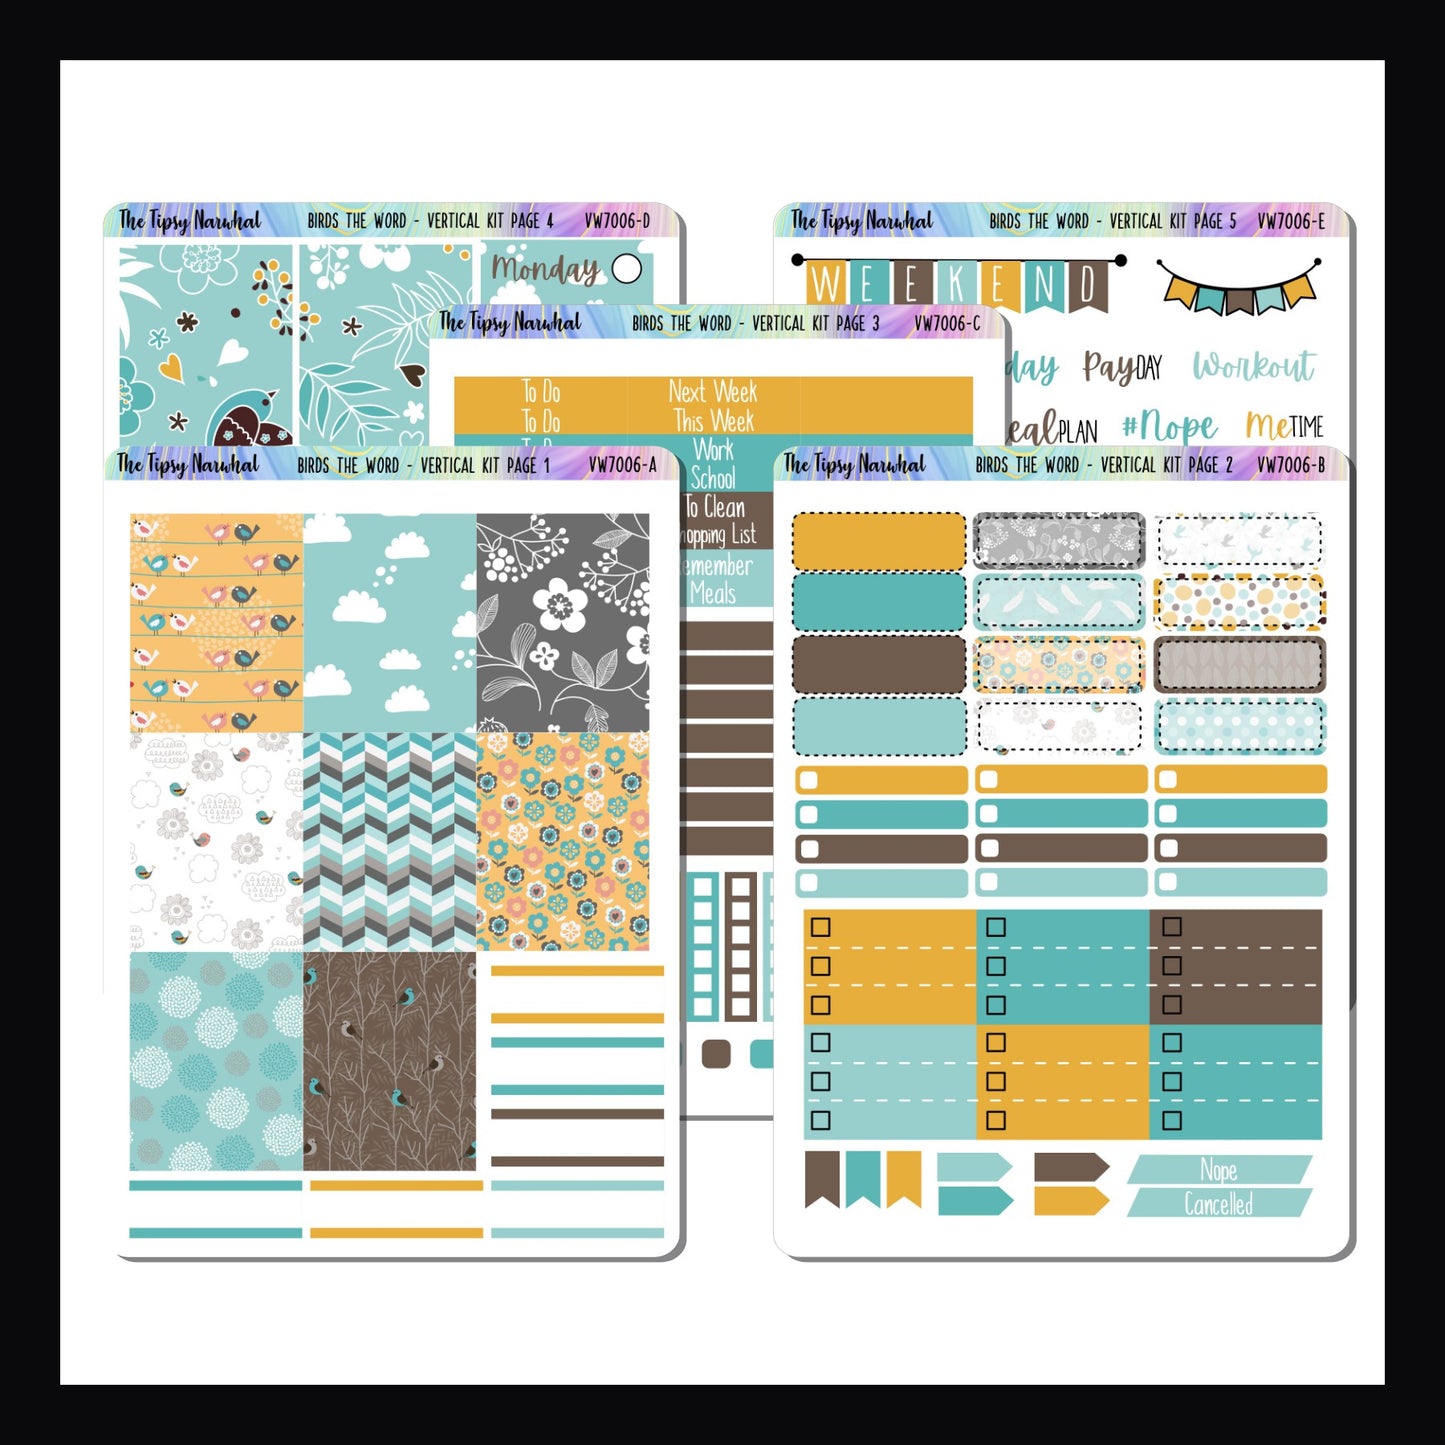 Birds the Word Vertical Kit is a 5 page sticker kit.  Stickers are sized to fit the standard vertical layout.  Features a floral bird theme with a bold color palette of yellows, blues and browns. 